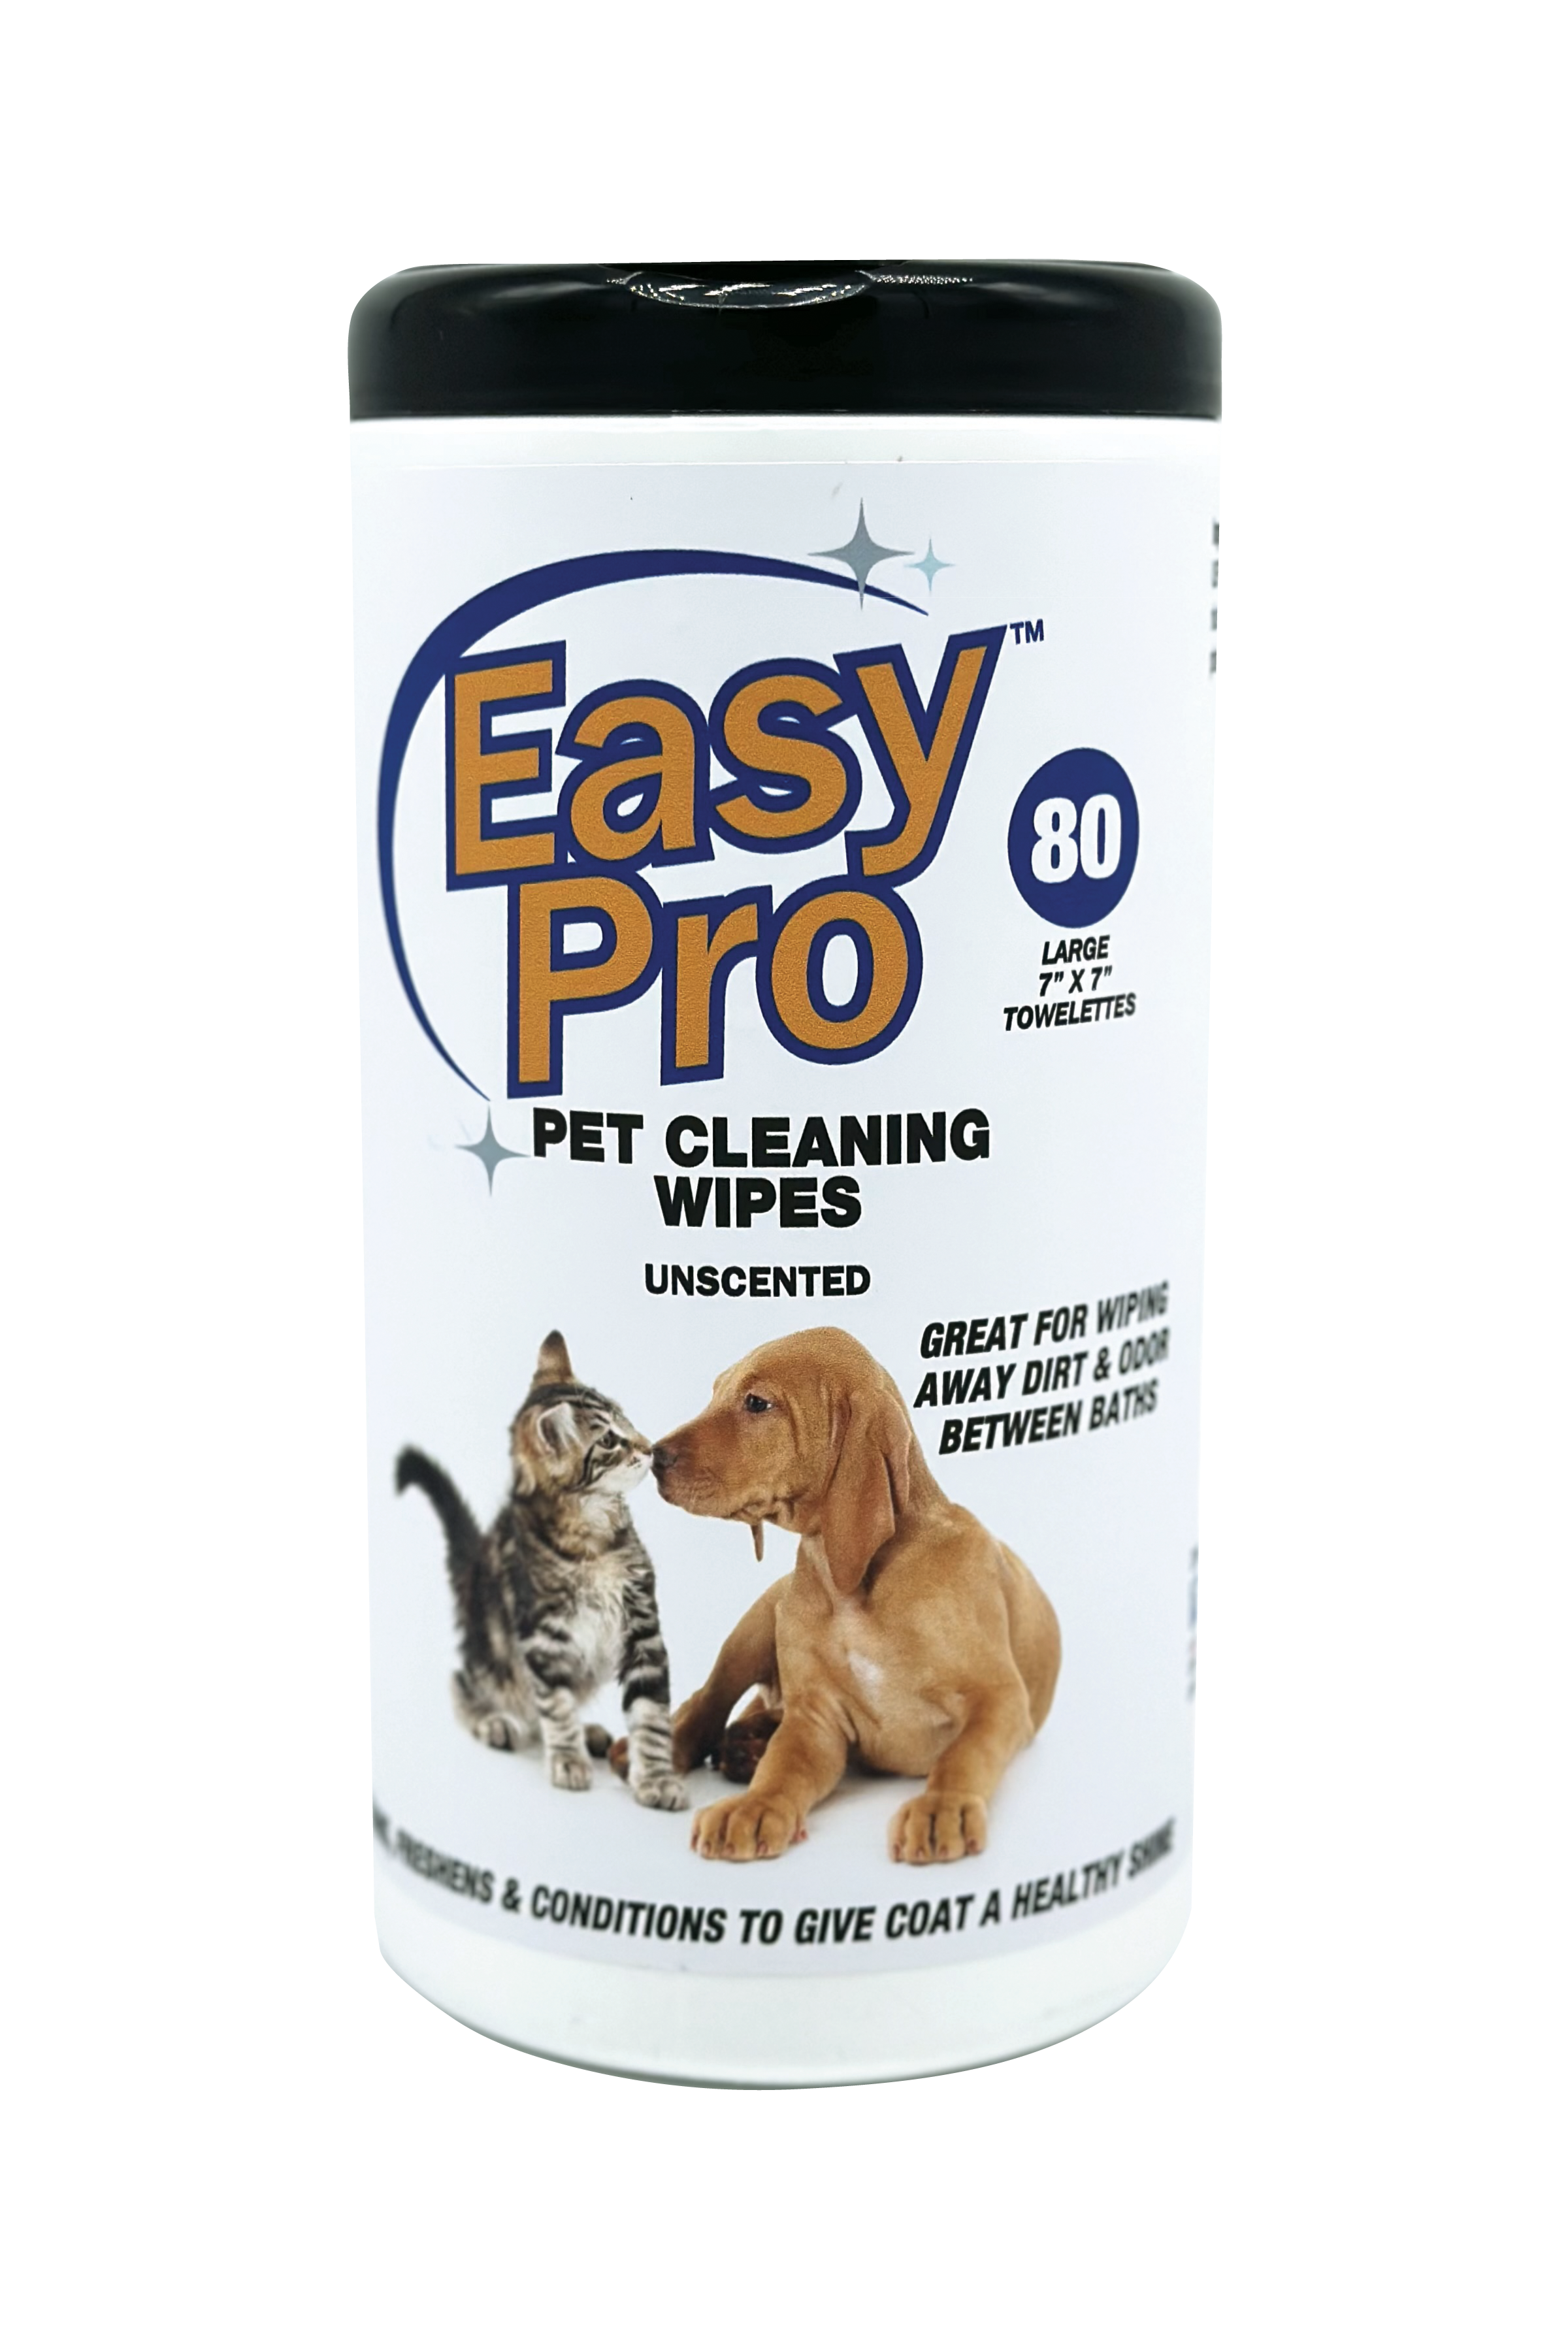 Easy Pro Cleaning Wipes- Unscented- 80ct, 6 canister per case